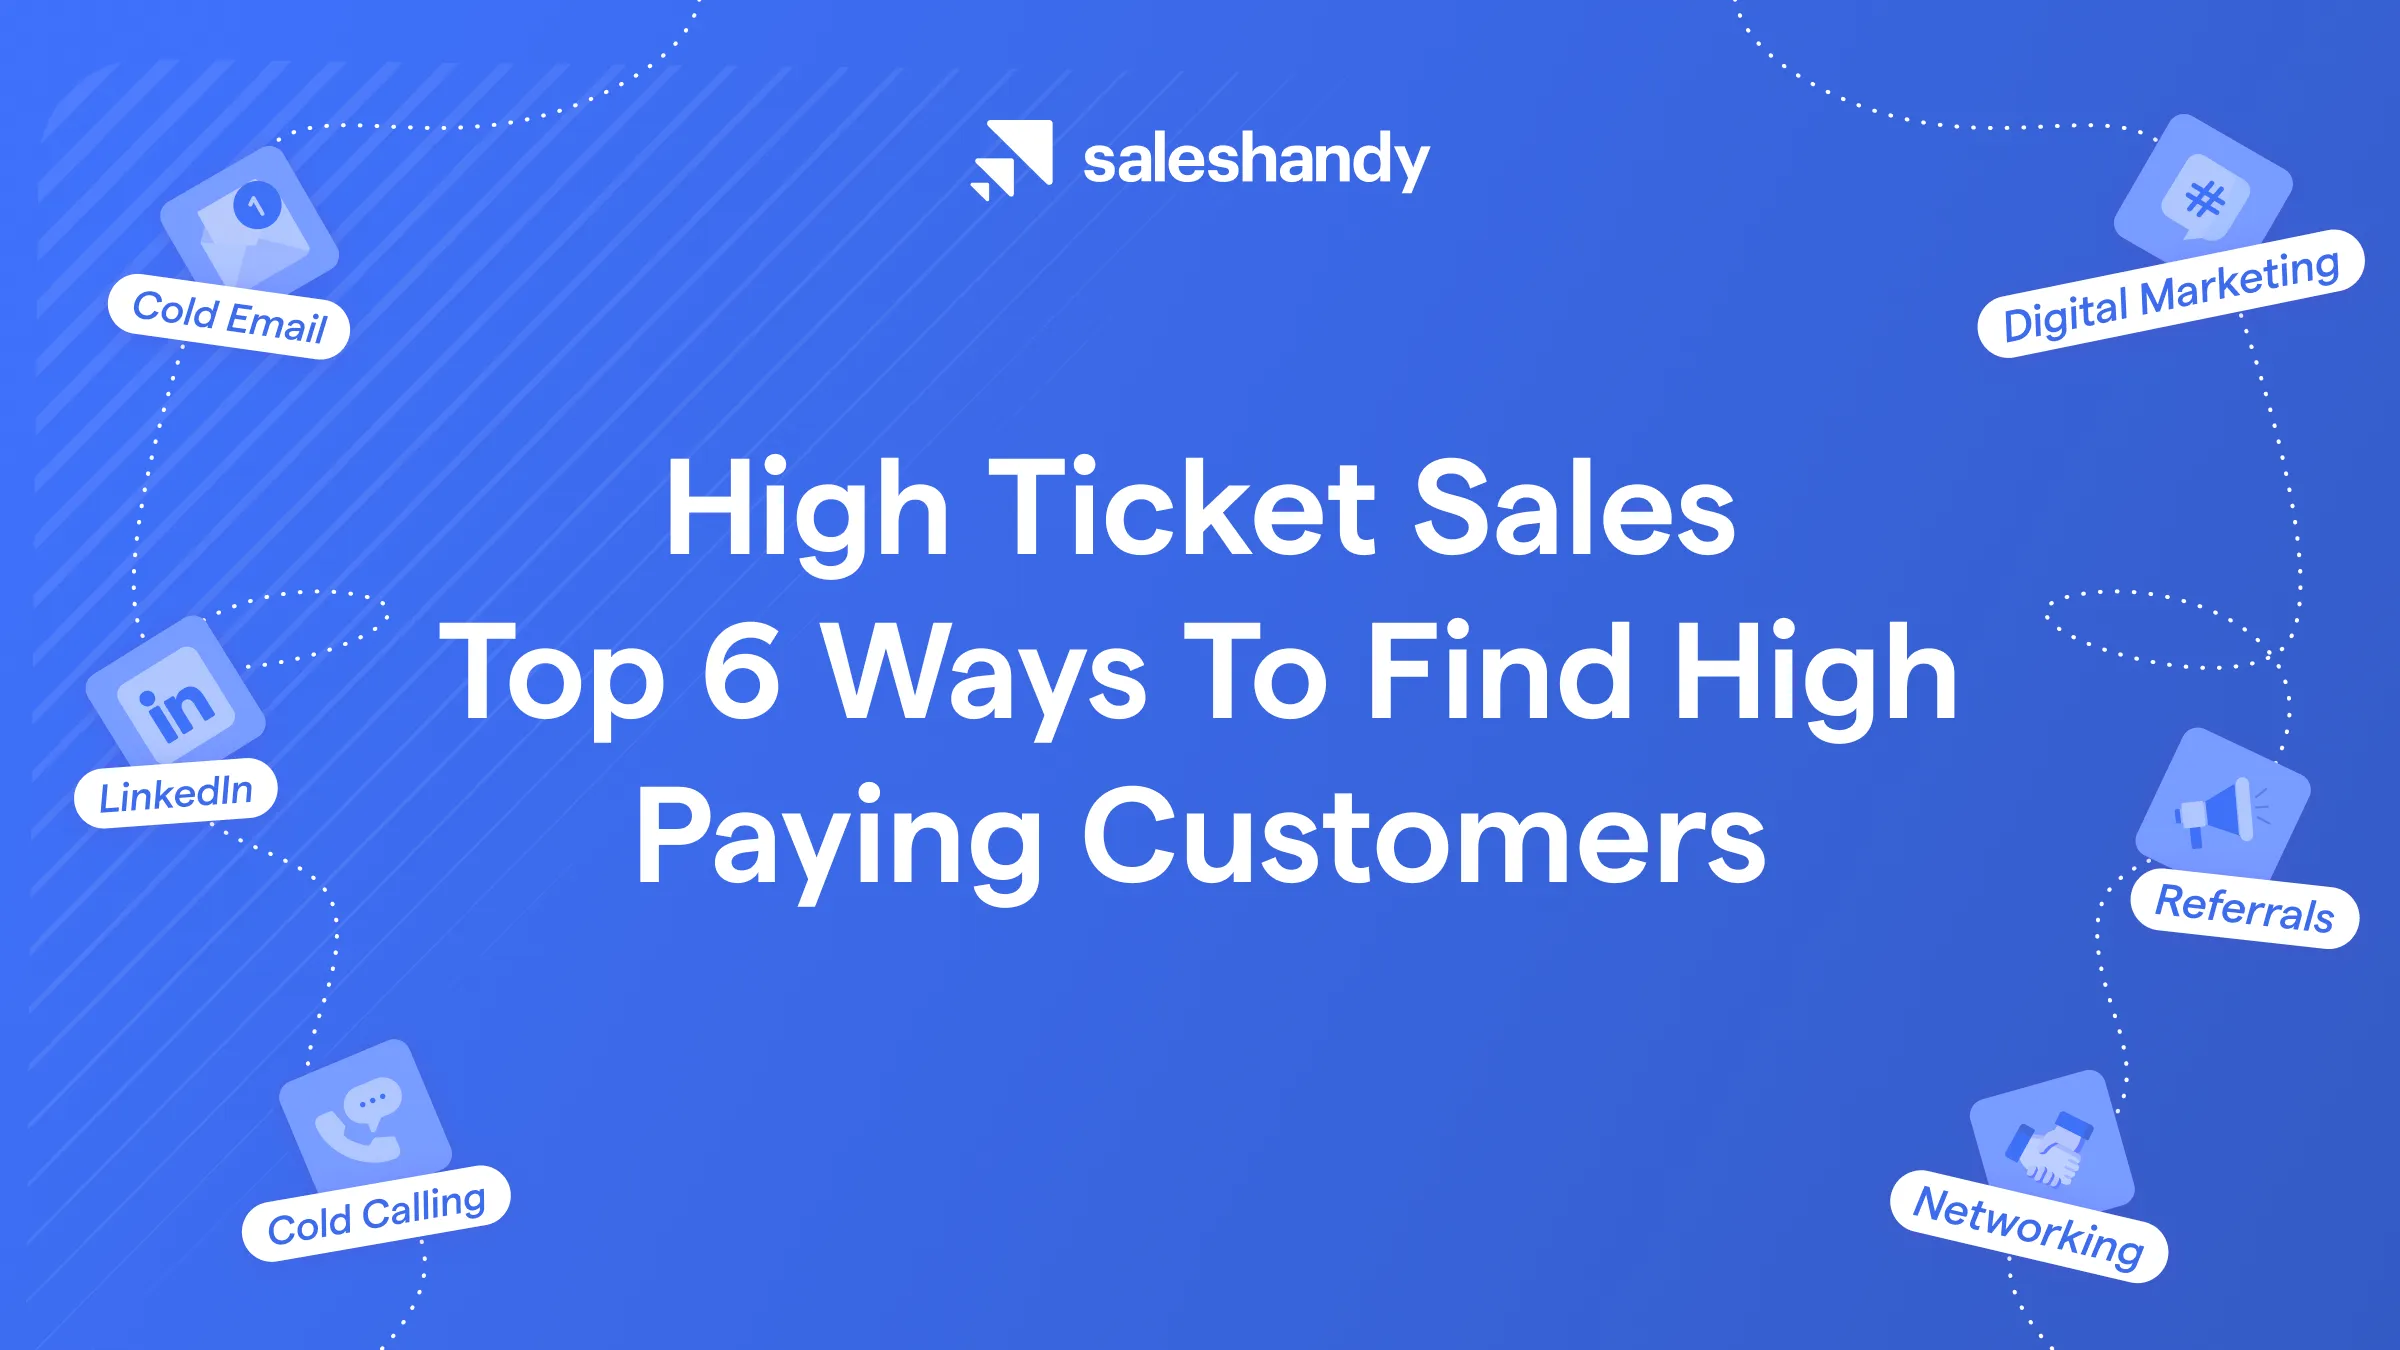 High Ticket Sales: Top 6 Ways To Find High Paying Customers